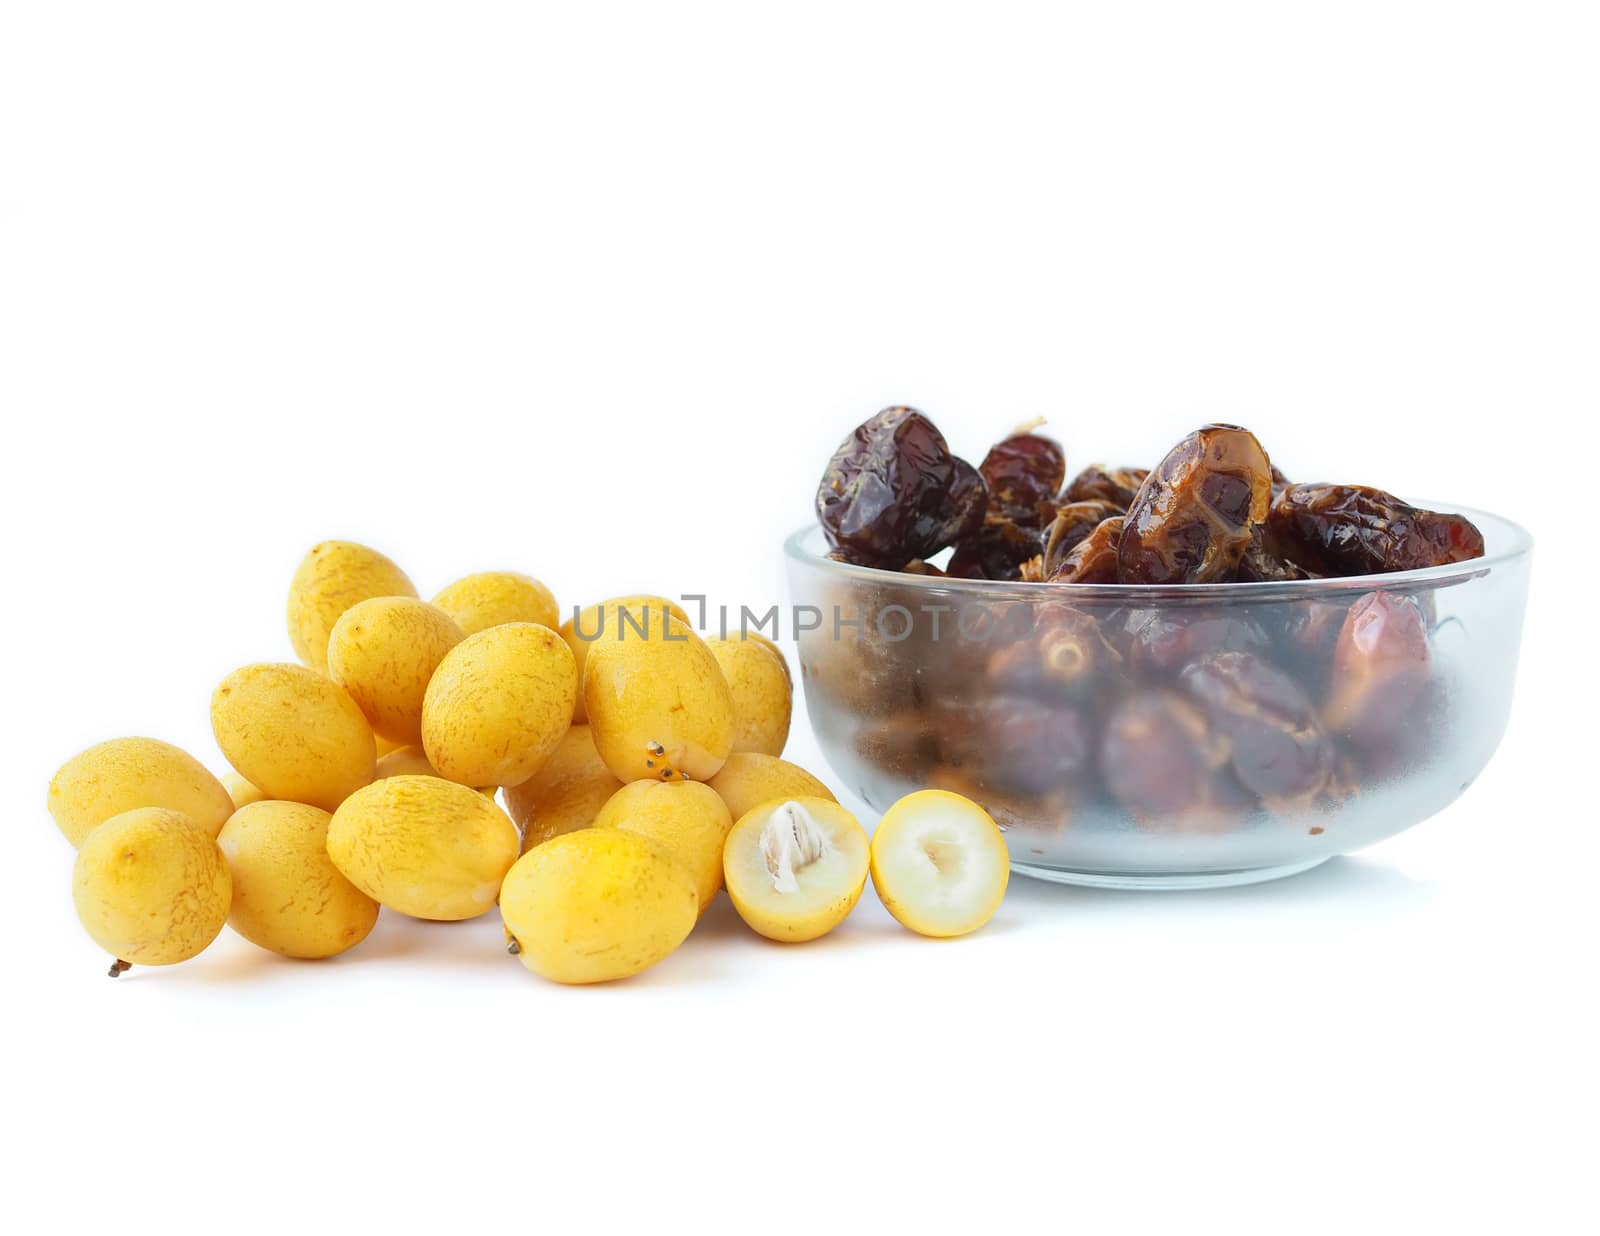 Close-up of fresh and dried date plam isolated on a white background.